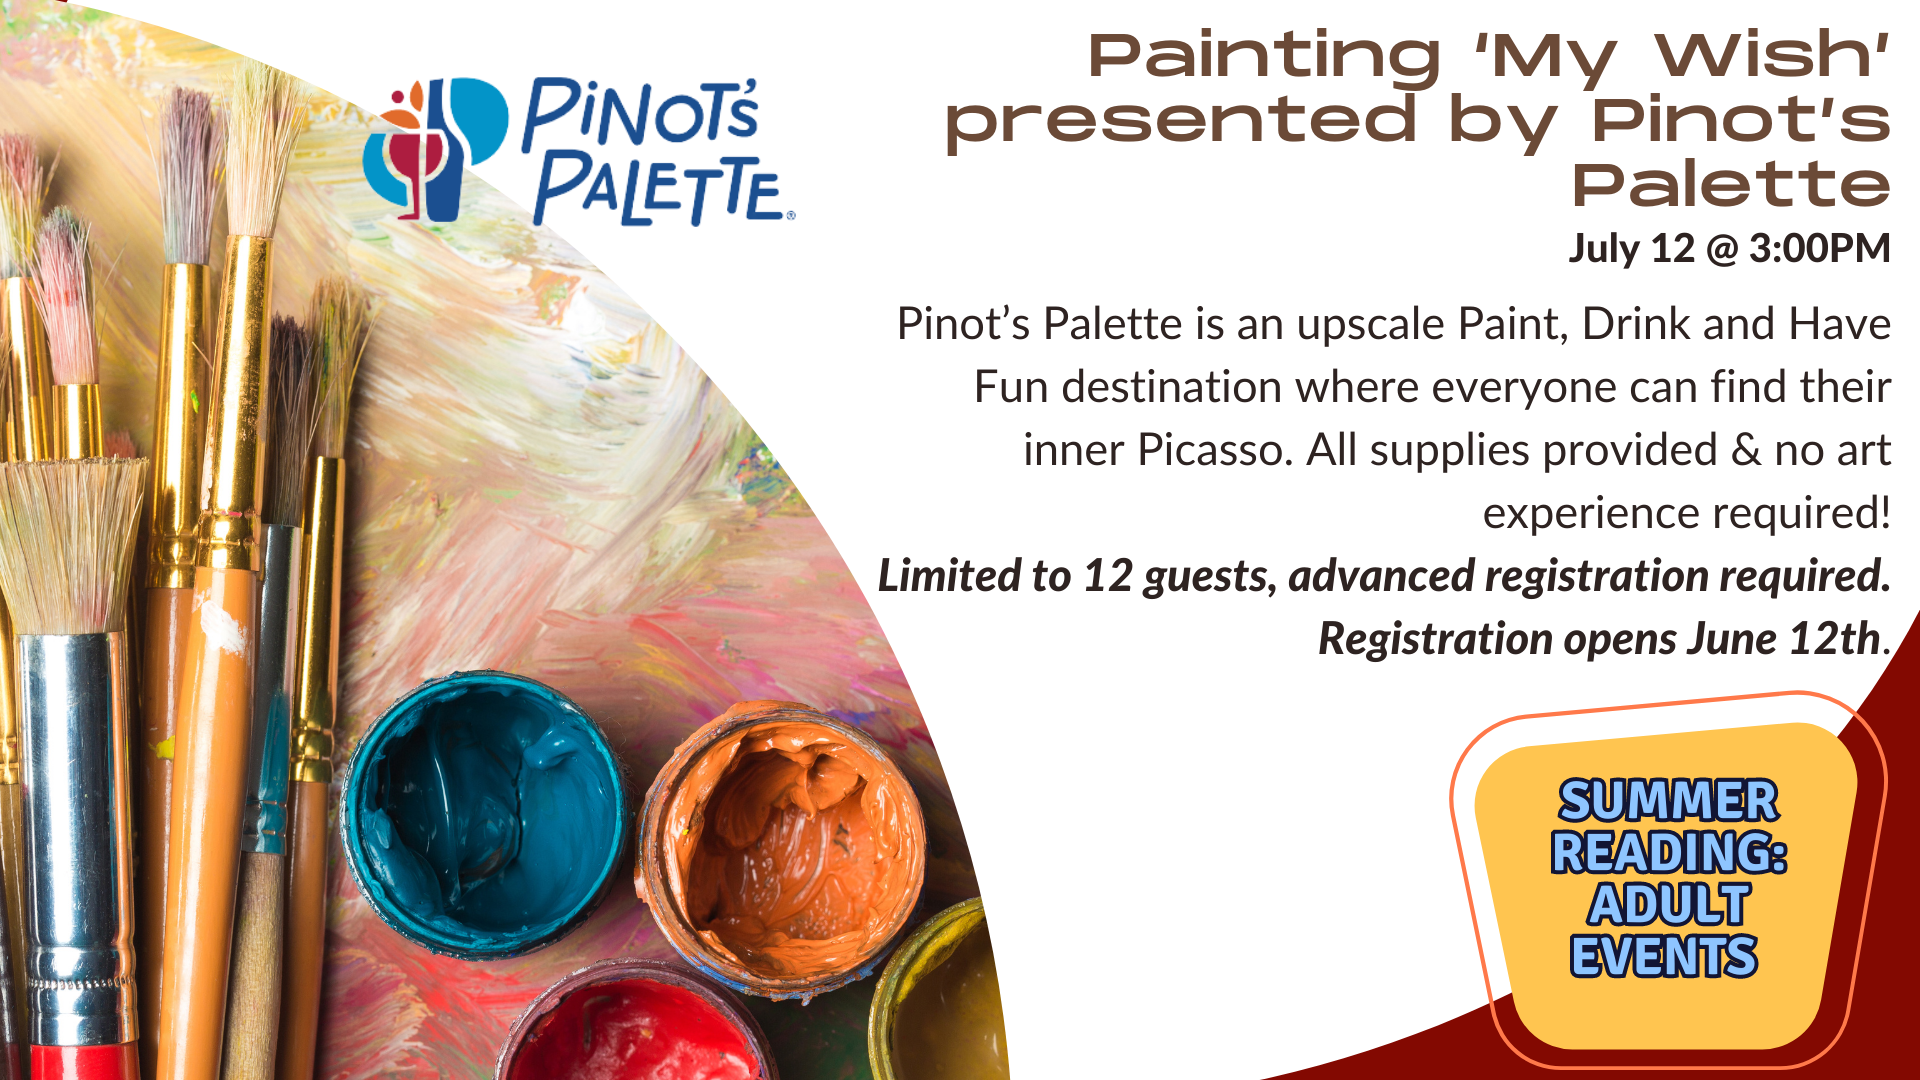 Adult Events: Painting "My Wish" with Pinot's Palette July 12 3:00 PM    